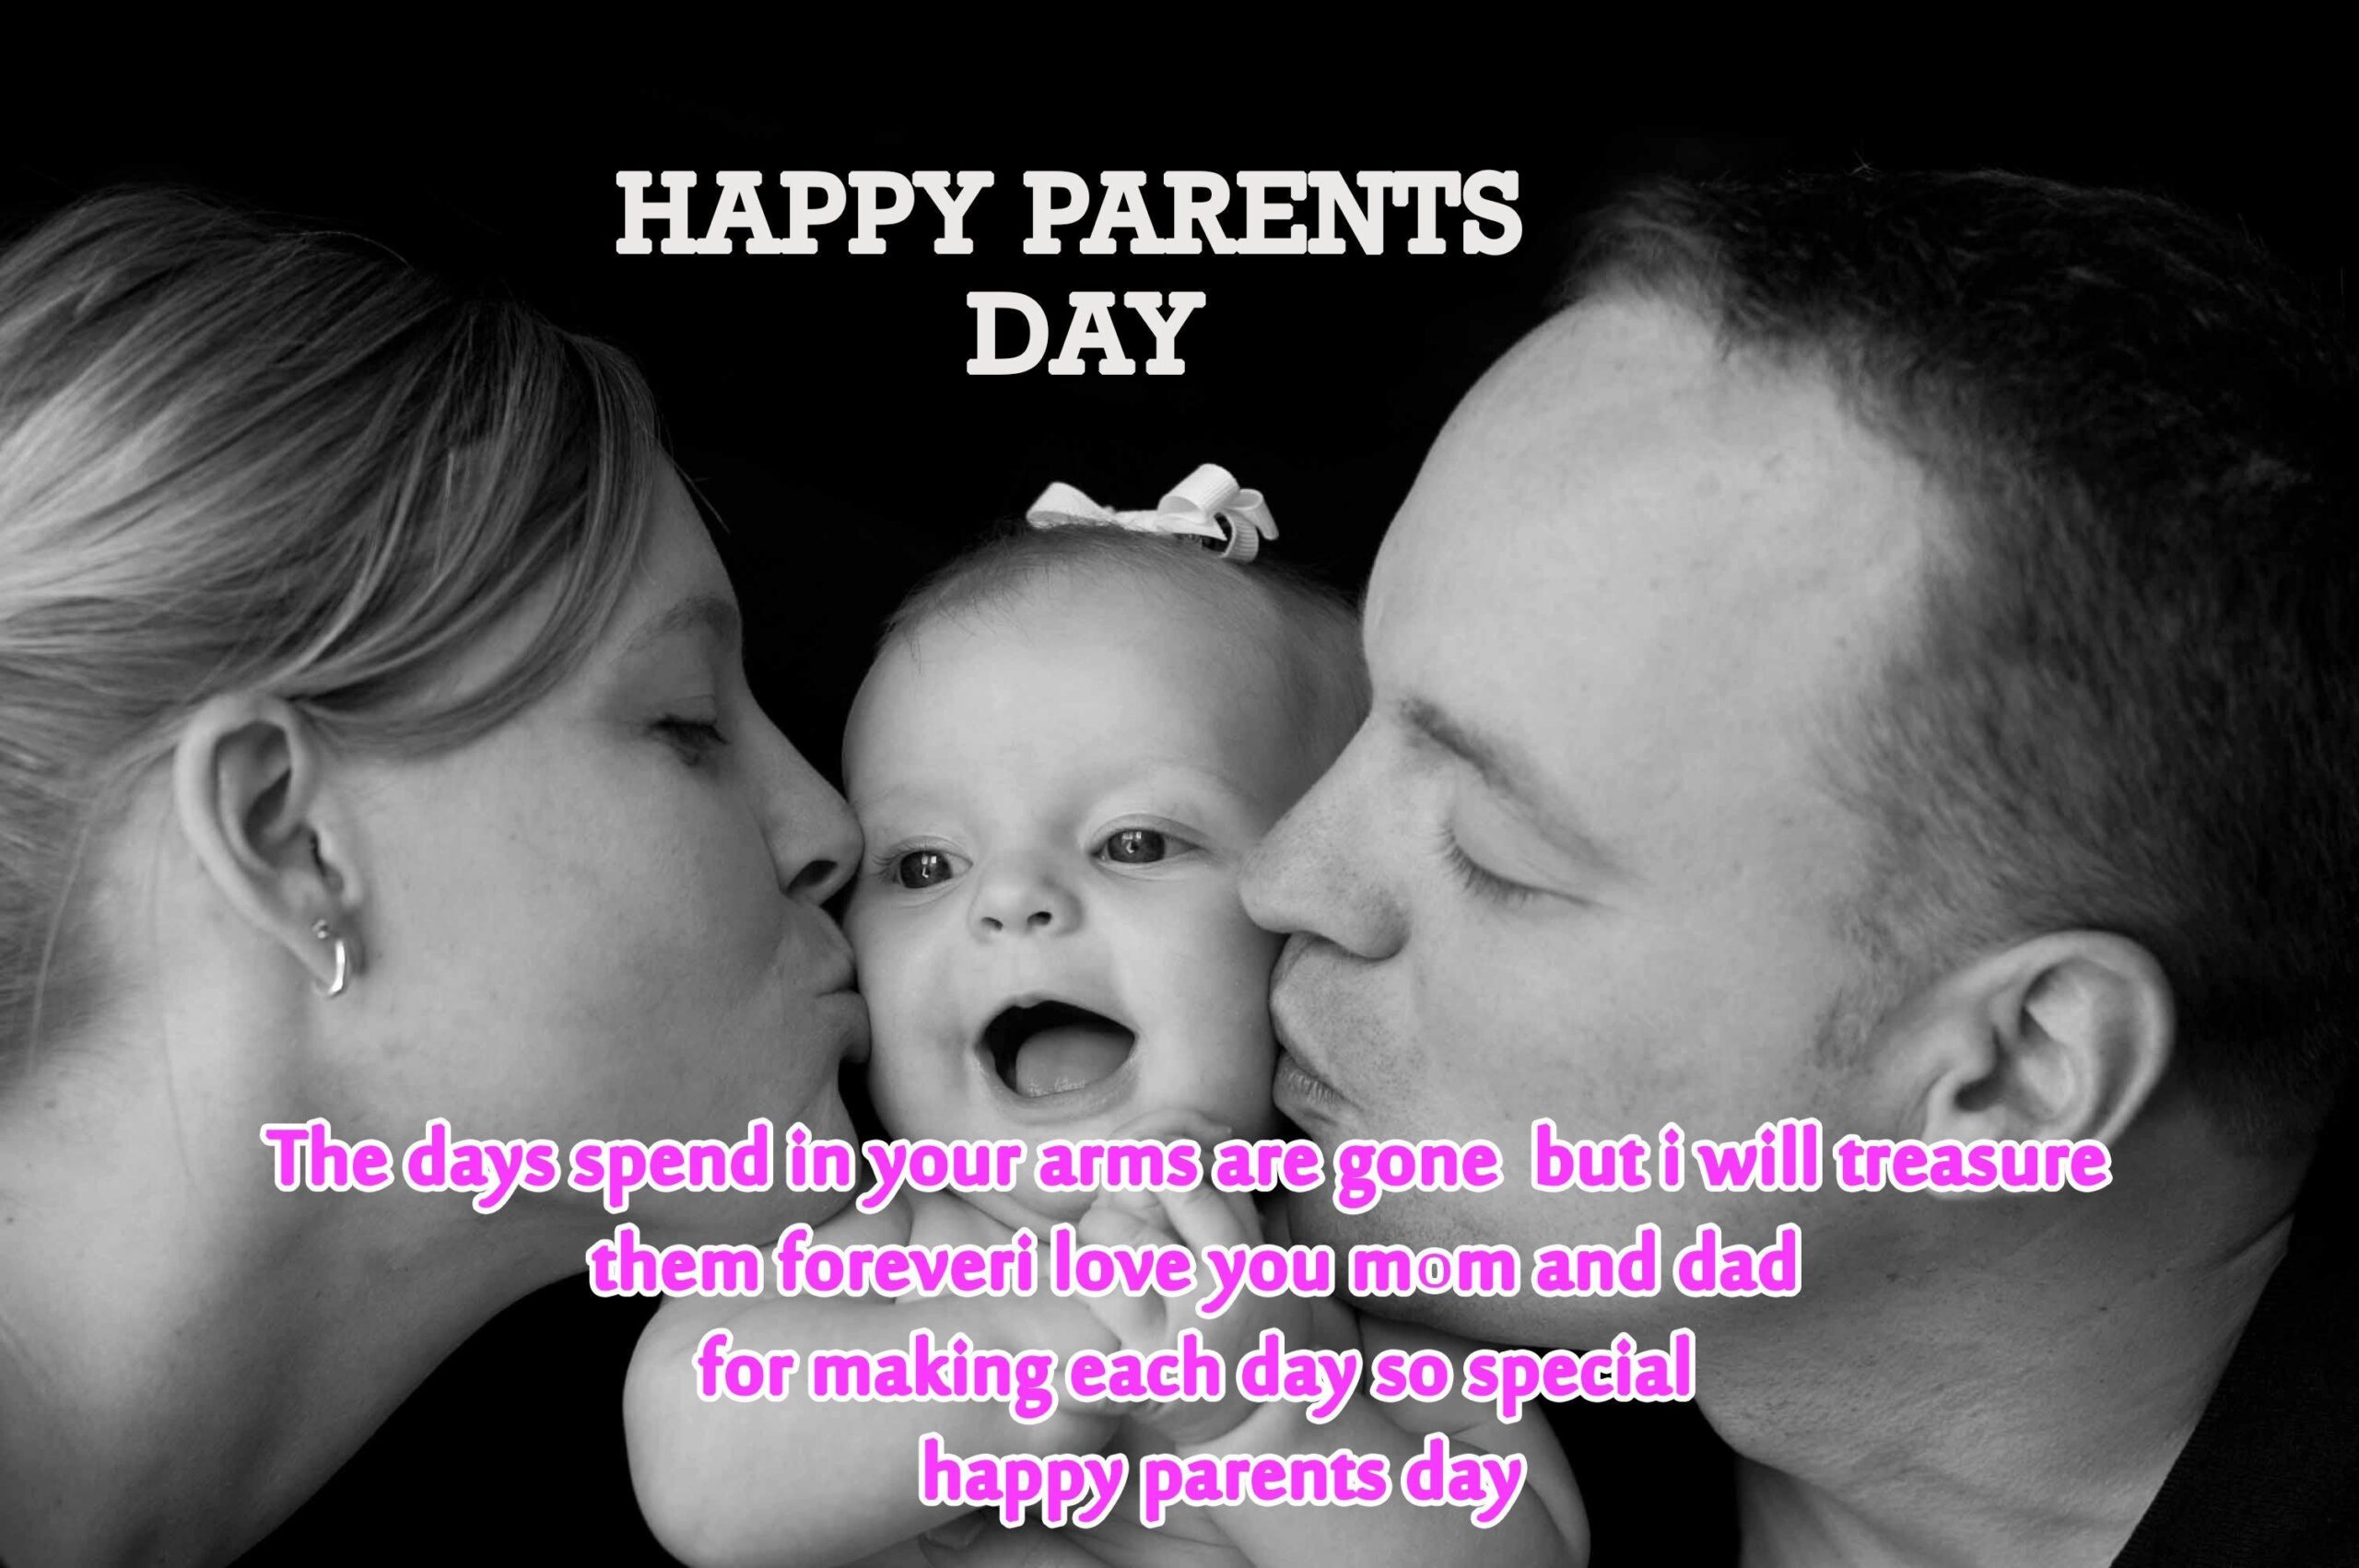 Parents Day Wallpapers Free Download